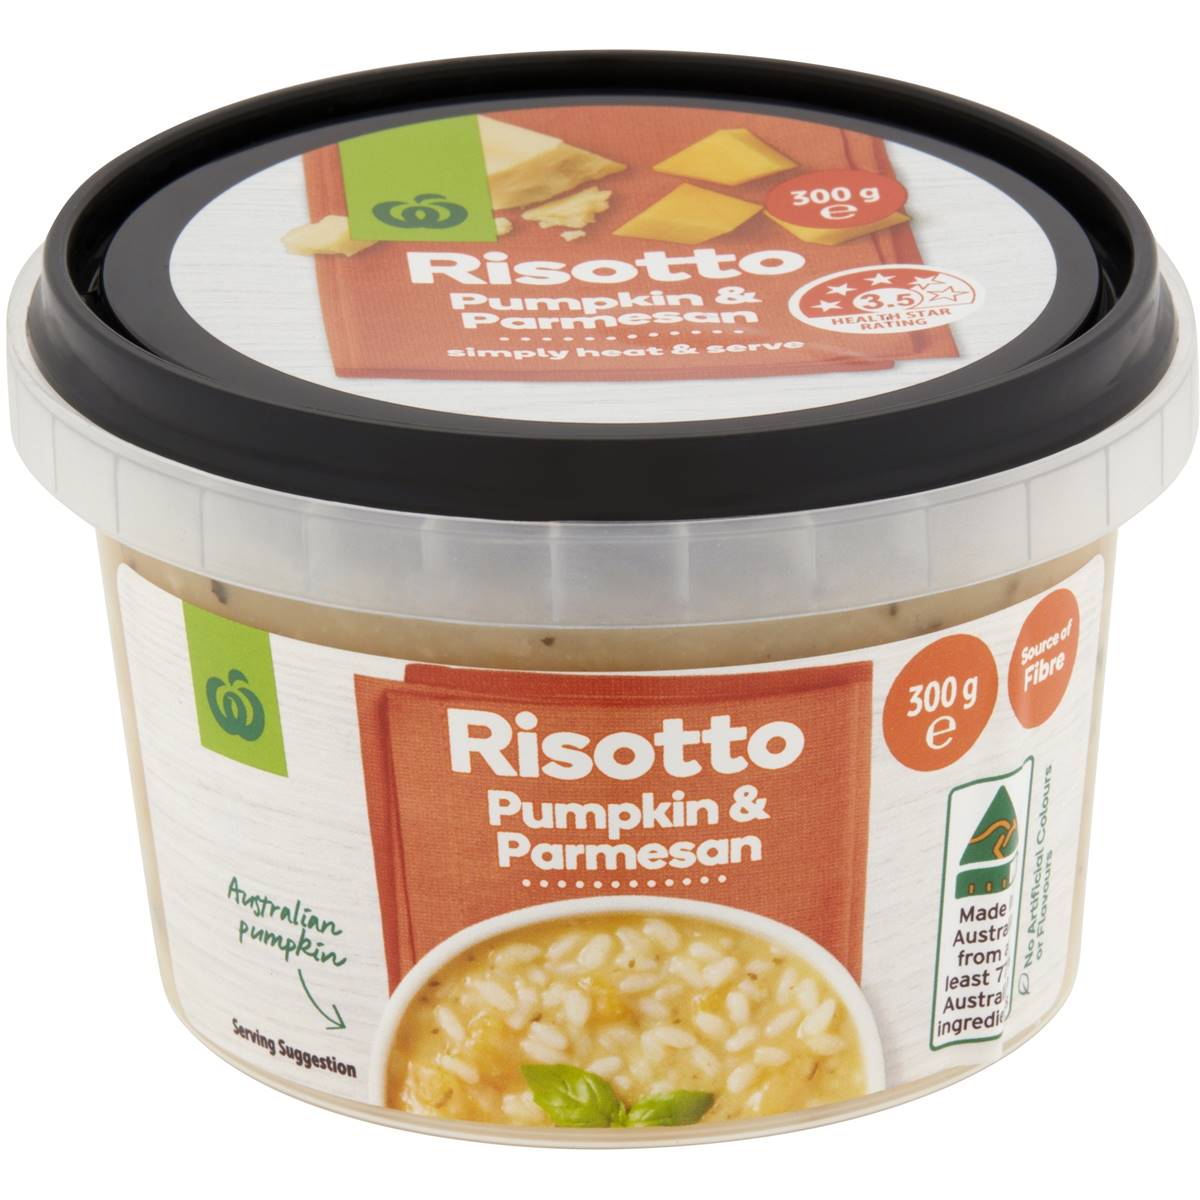 Calories in Woolworths Pumpkin Parmesan Risotto